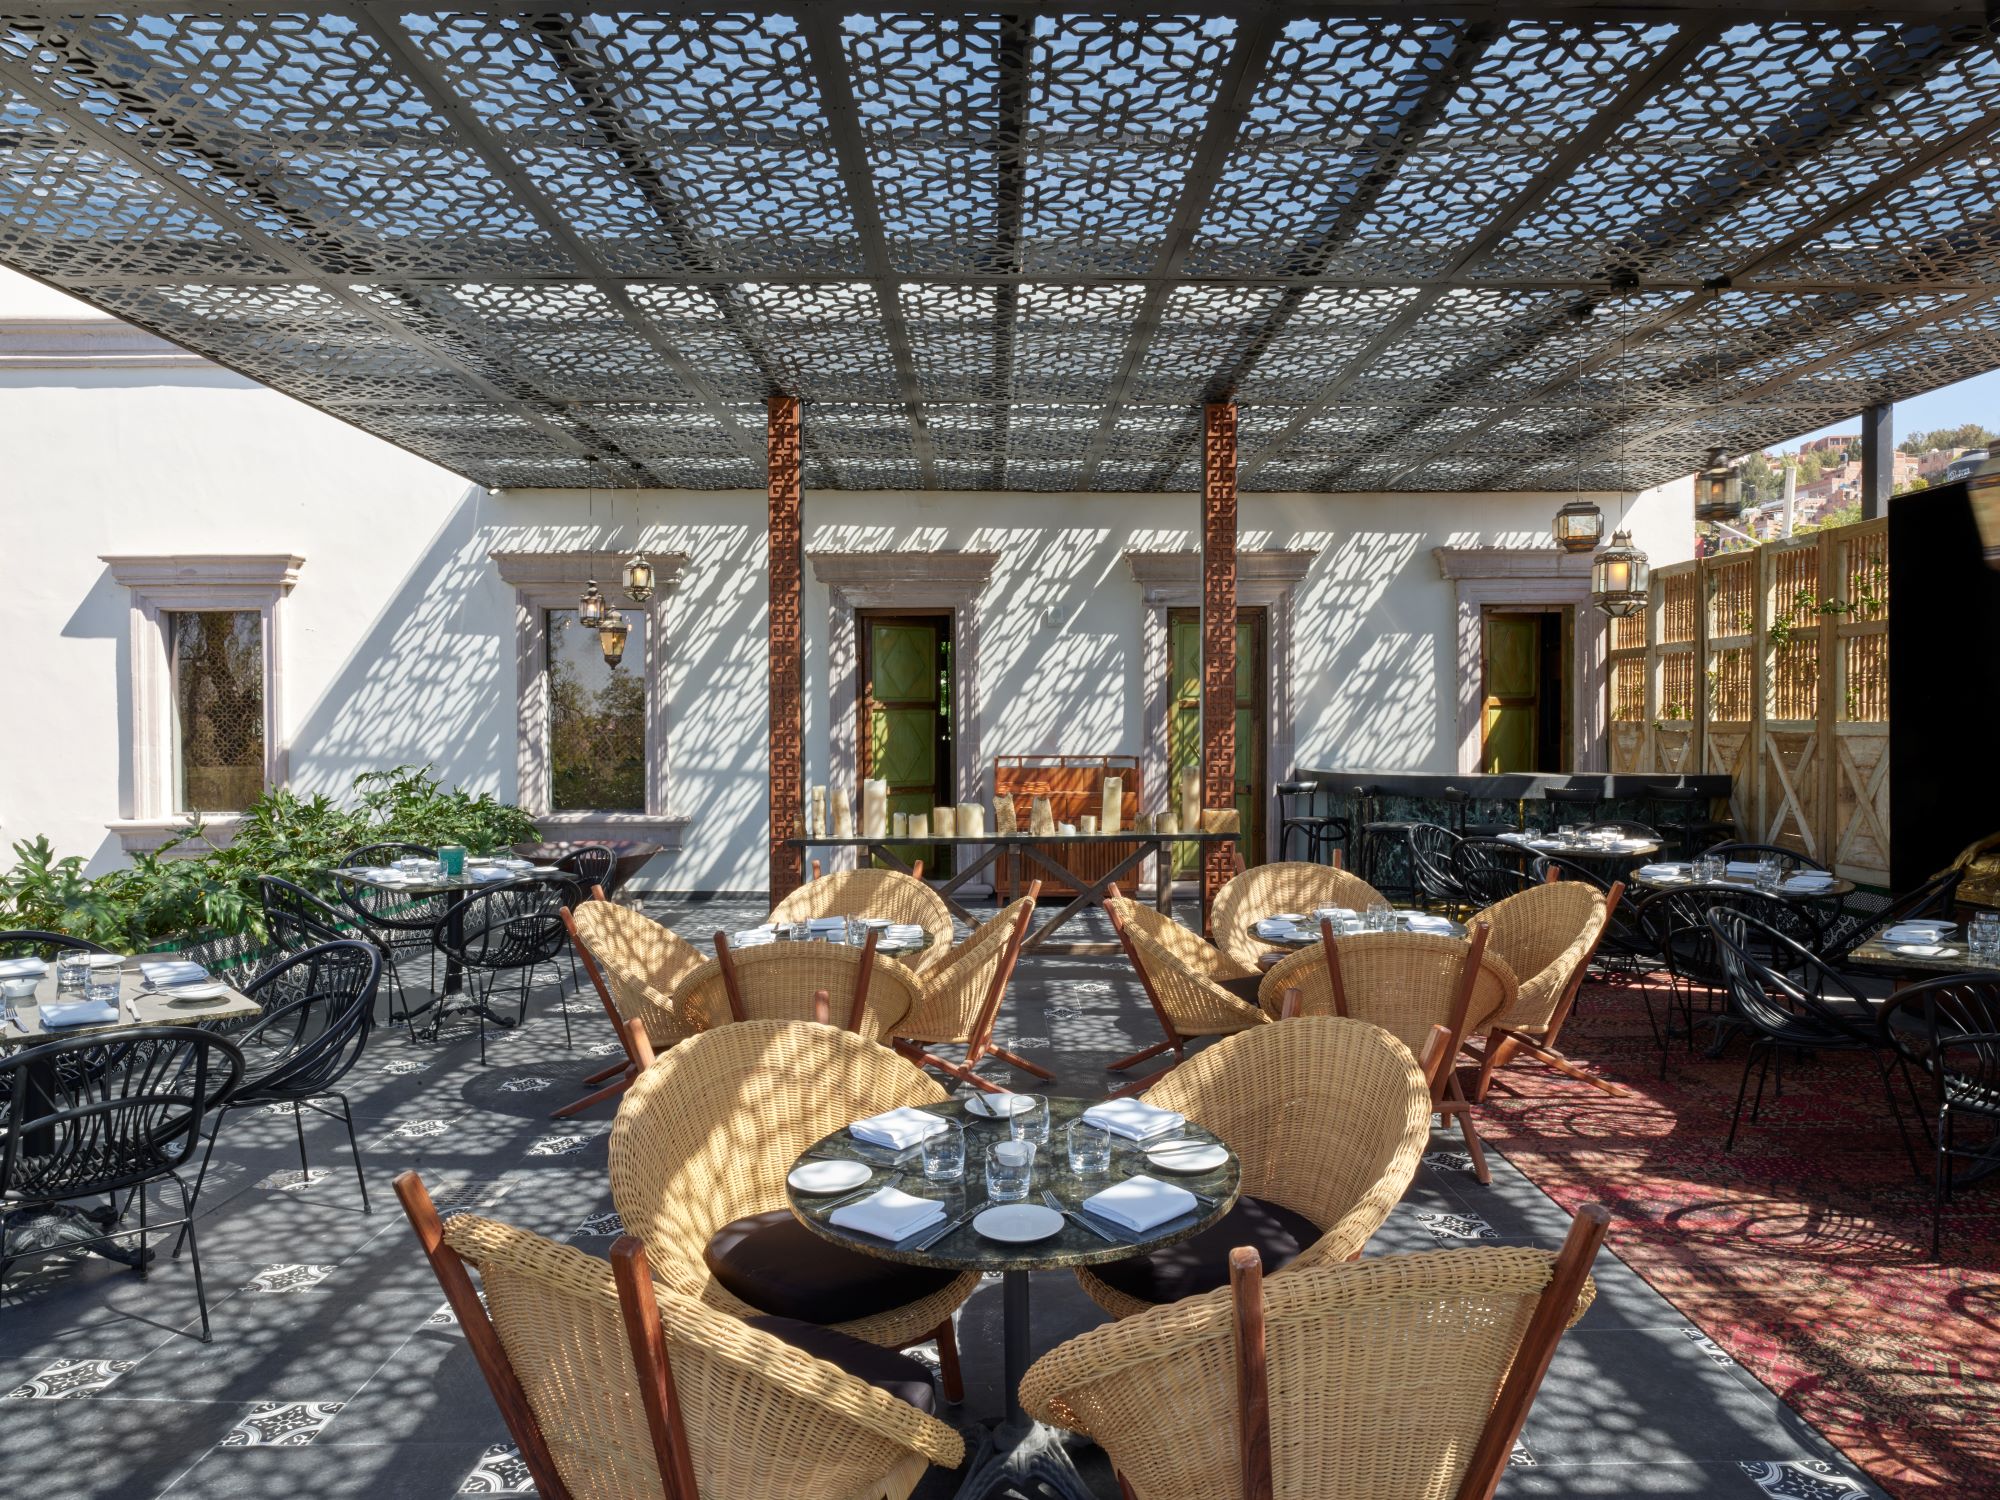 Terrace Dining at Spice Market